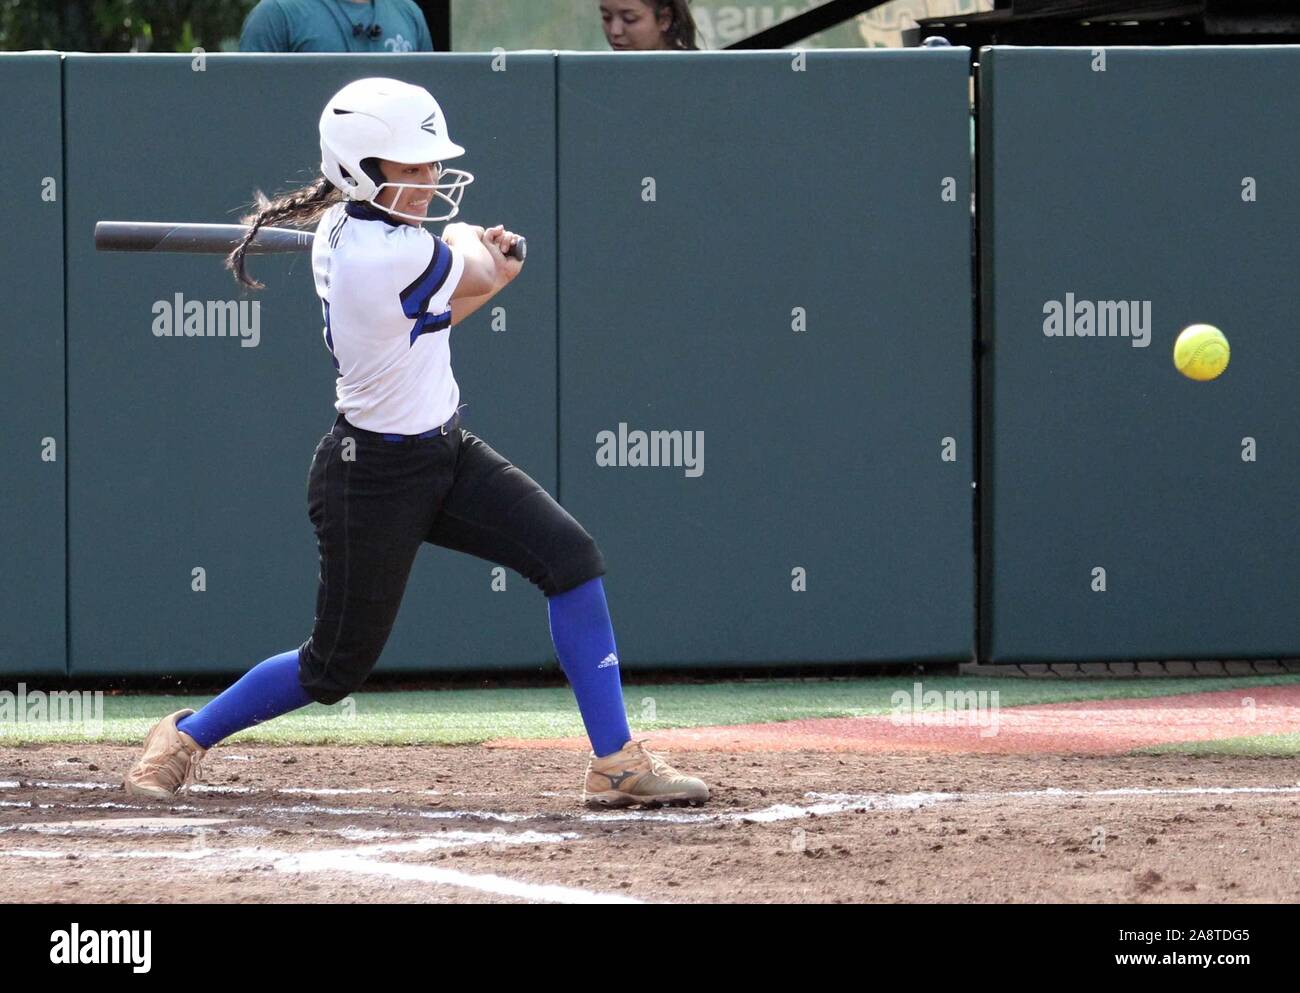 November 10, 2019 - Chaminade Silverswords Kailah Gates-Coyaso #1 hits the ball during a game between the Chaminade Silverswords and the Hawaii Rainbow Warriors at the Rainbow Wahine Softball Stadium on the campus of University of Hawaii at Manoa in Honolulu, HI - Michael Sullivan/CSM. Stock Photo